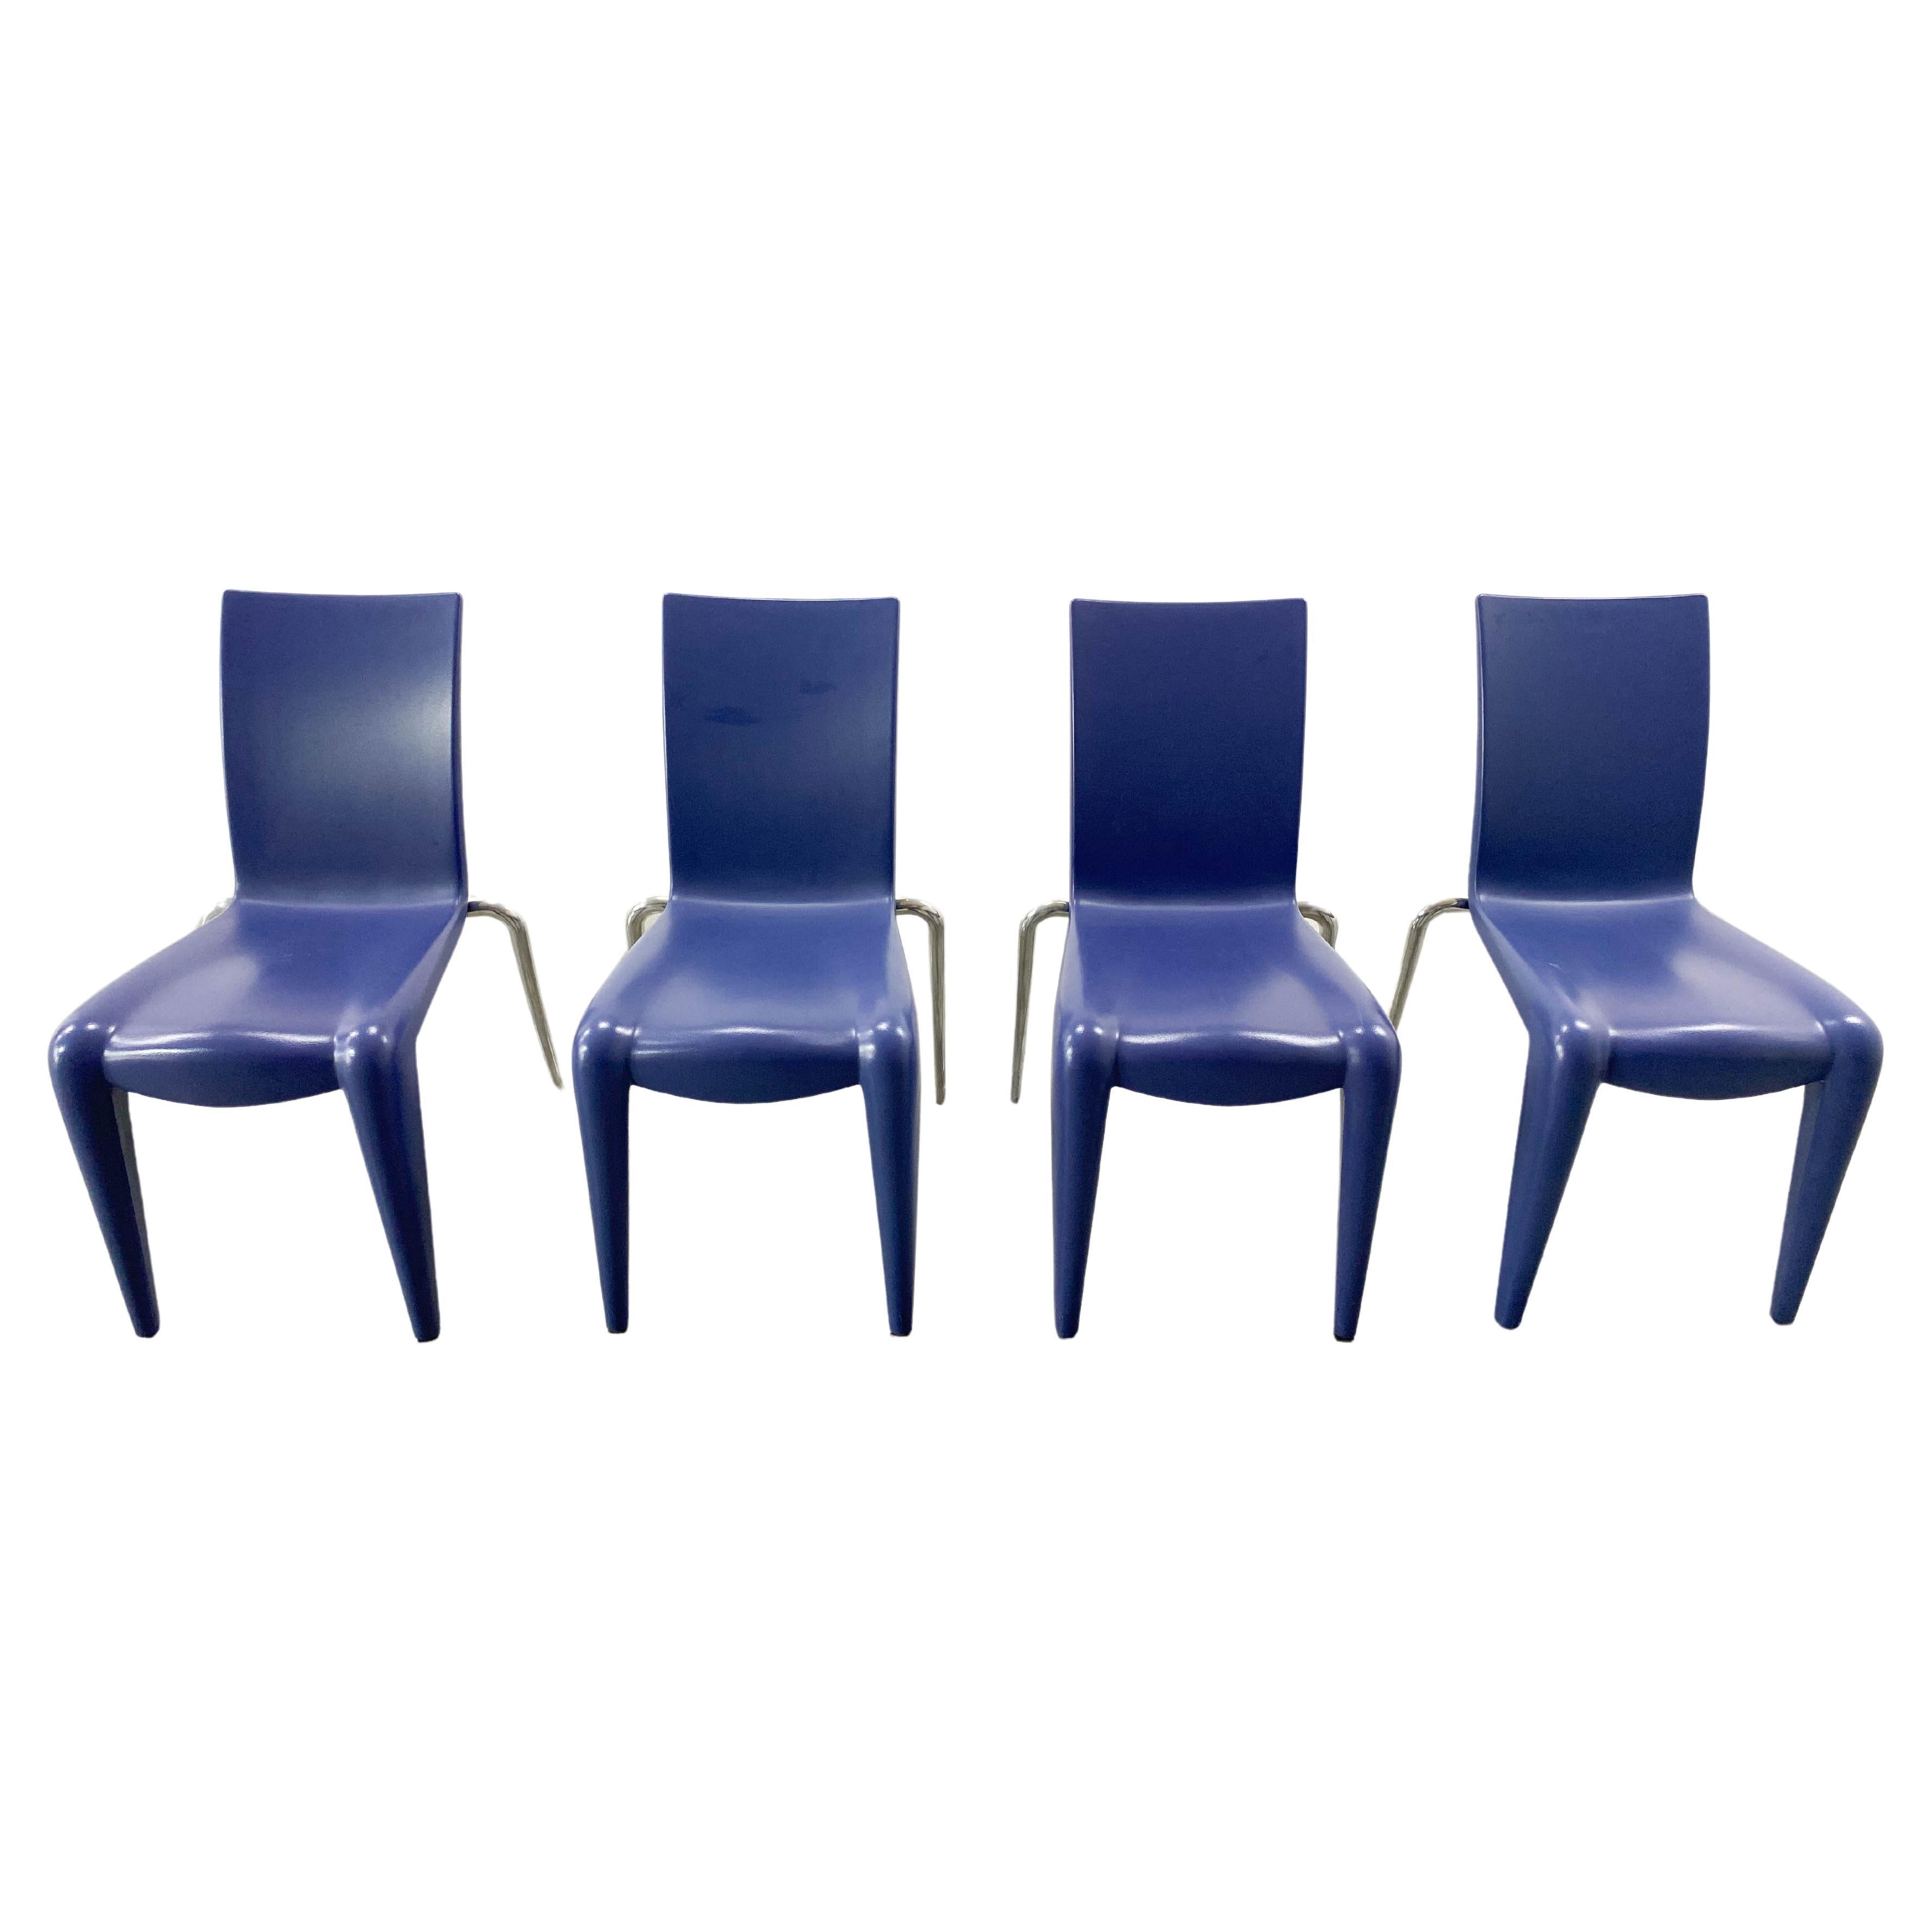 1990s Chairs